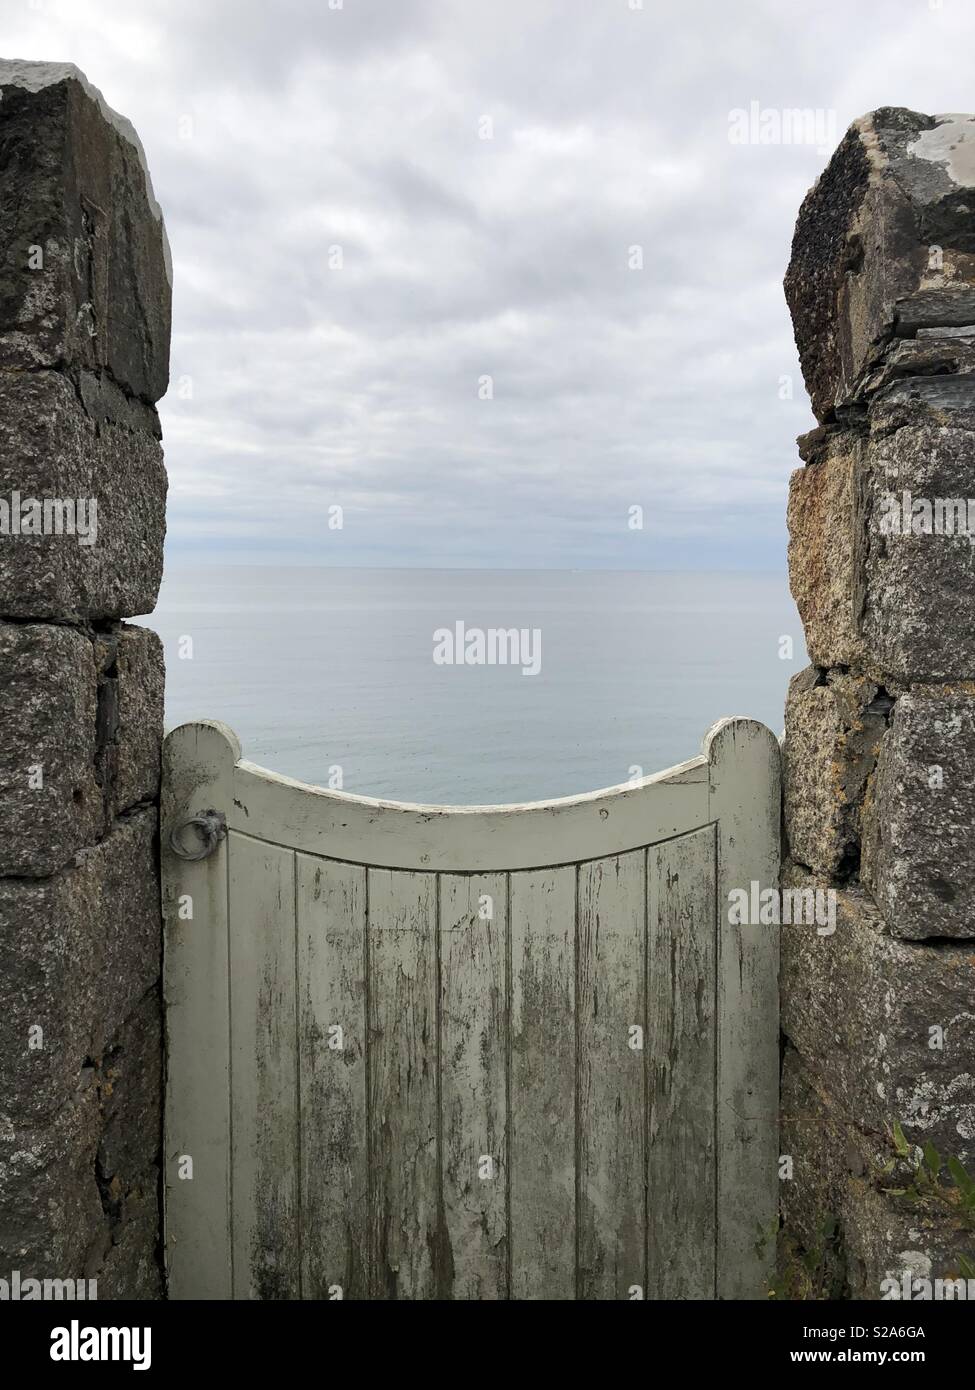 Gate in between stone wall overlooking the sea Stock Photo